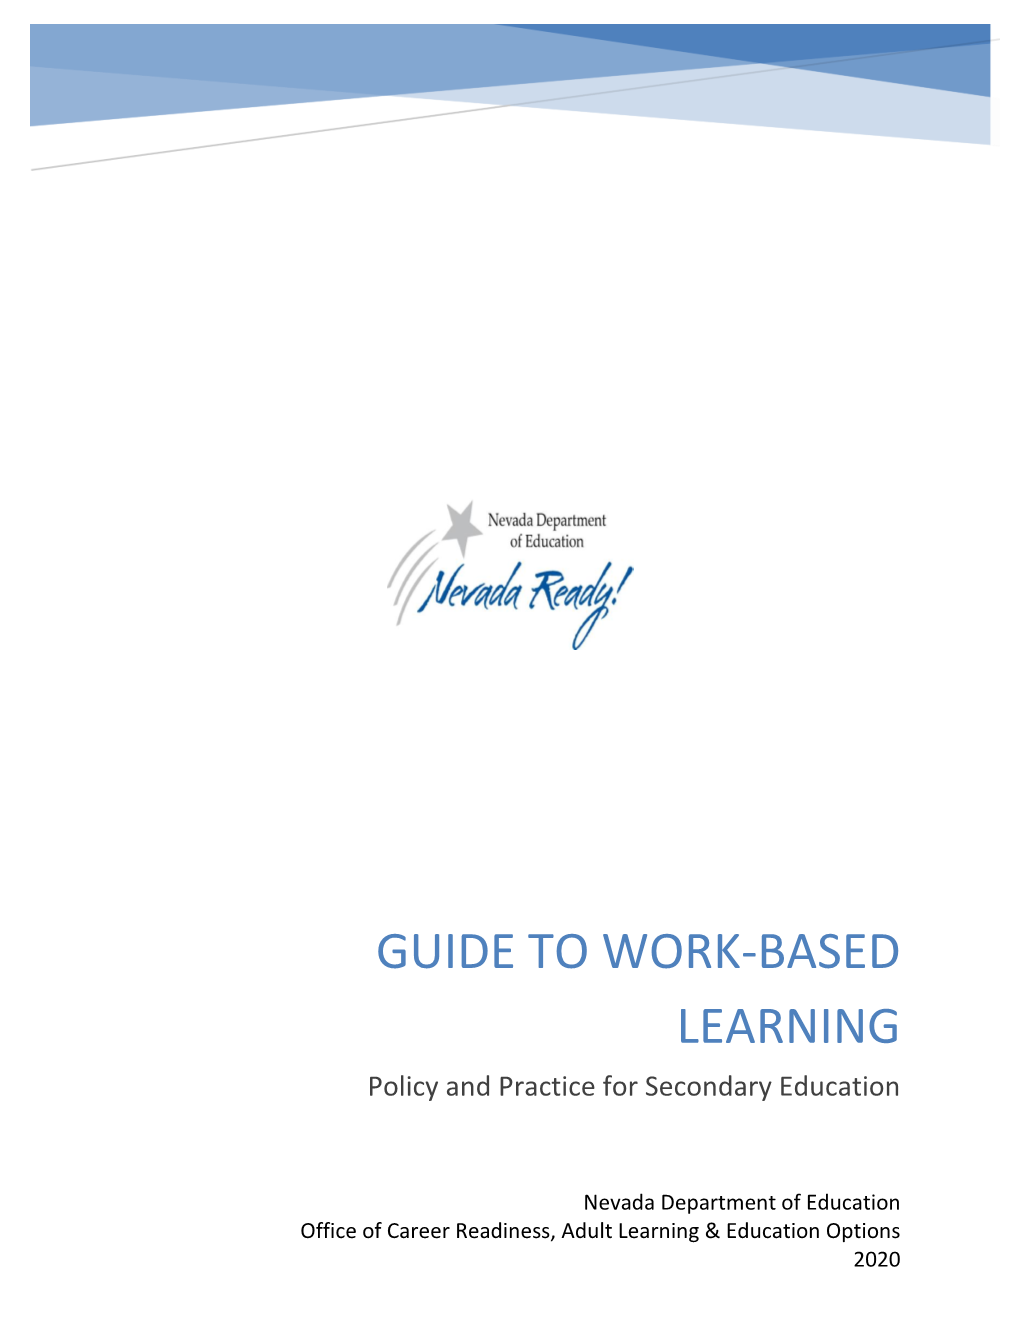 GUIDE to WORK-BASED LEARNING Policy and Practice for Secondary Education